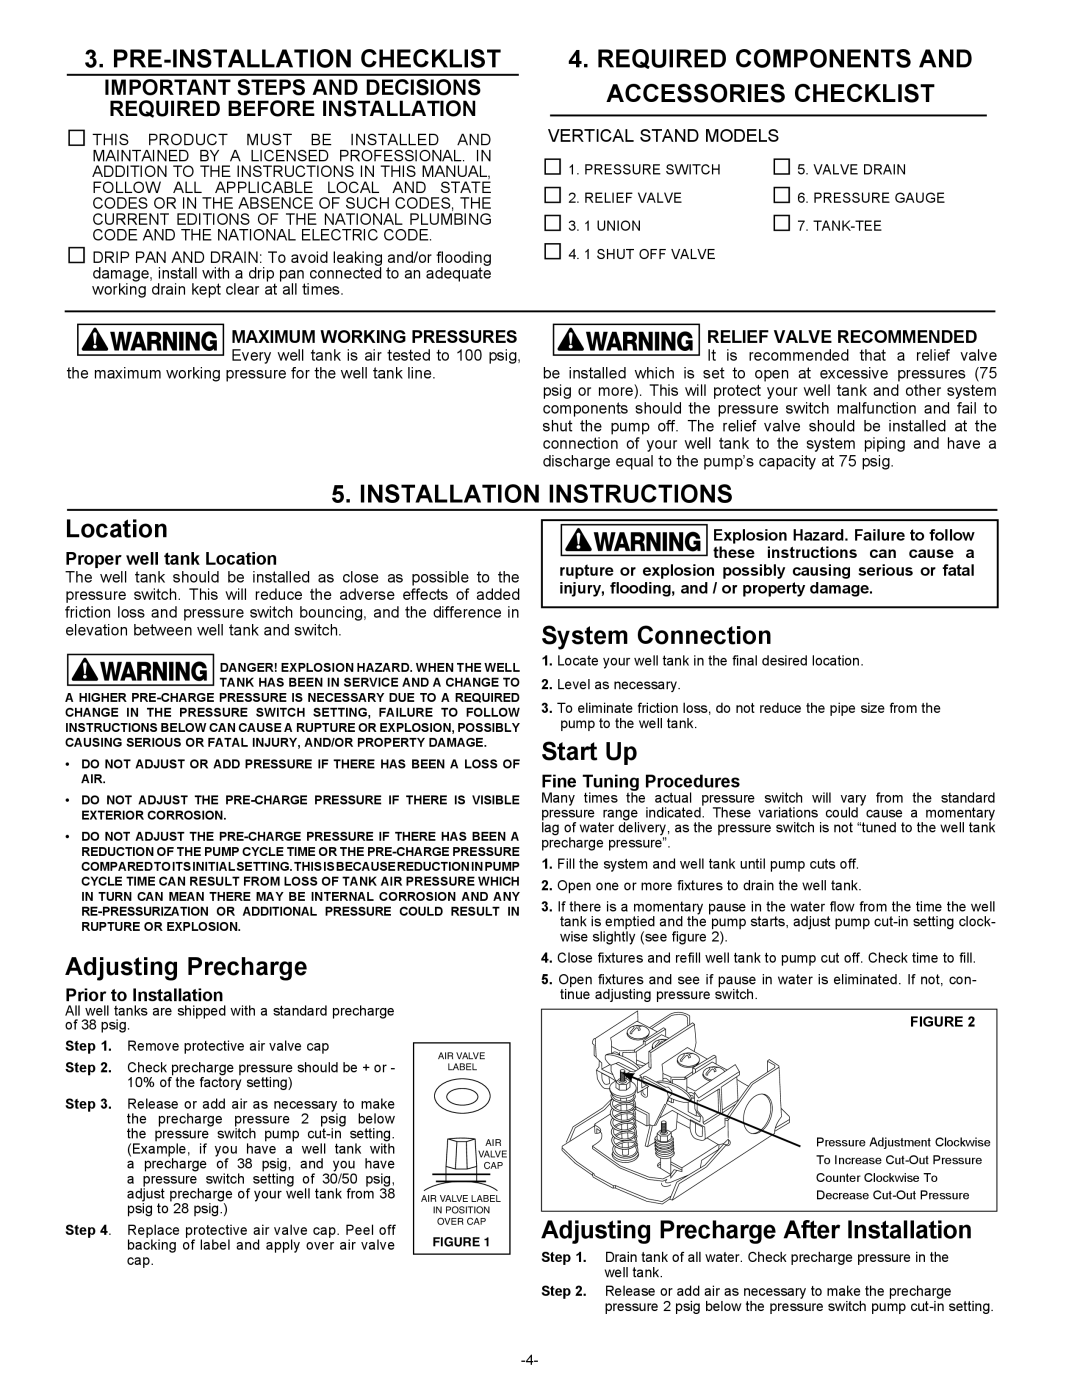 Amtrol 100 PSIG Pre-Installation Checklist, Required Components And Accessories Checklist, Installation Instructions 